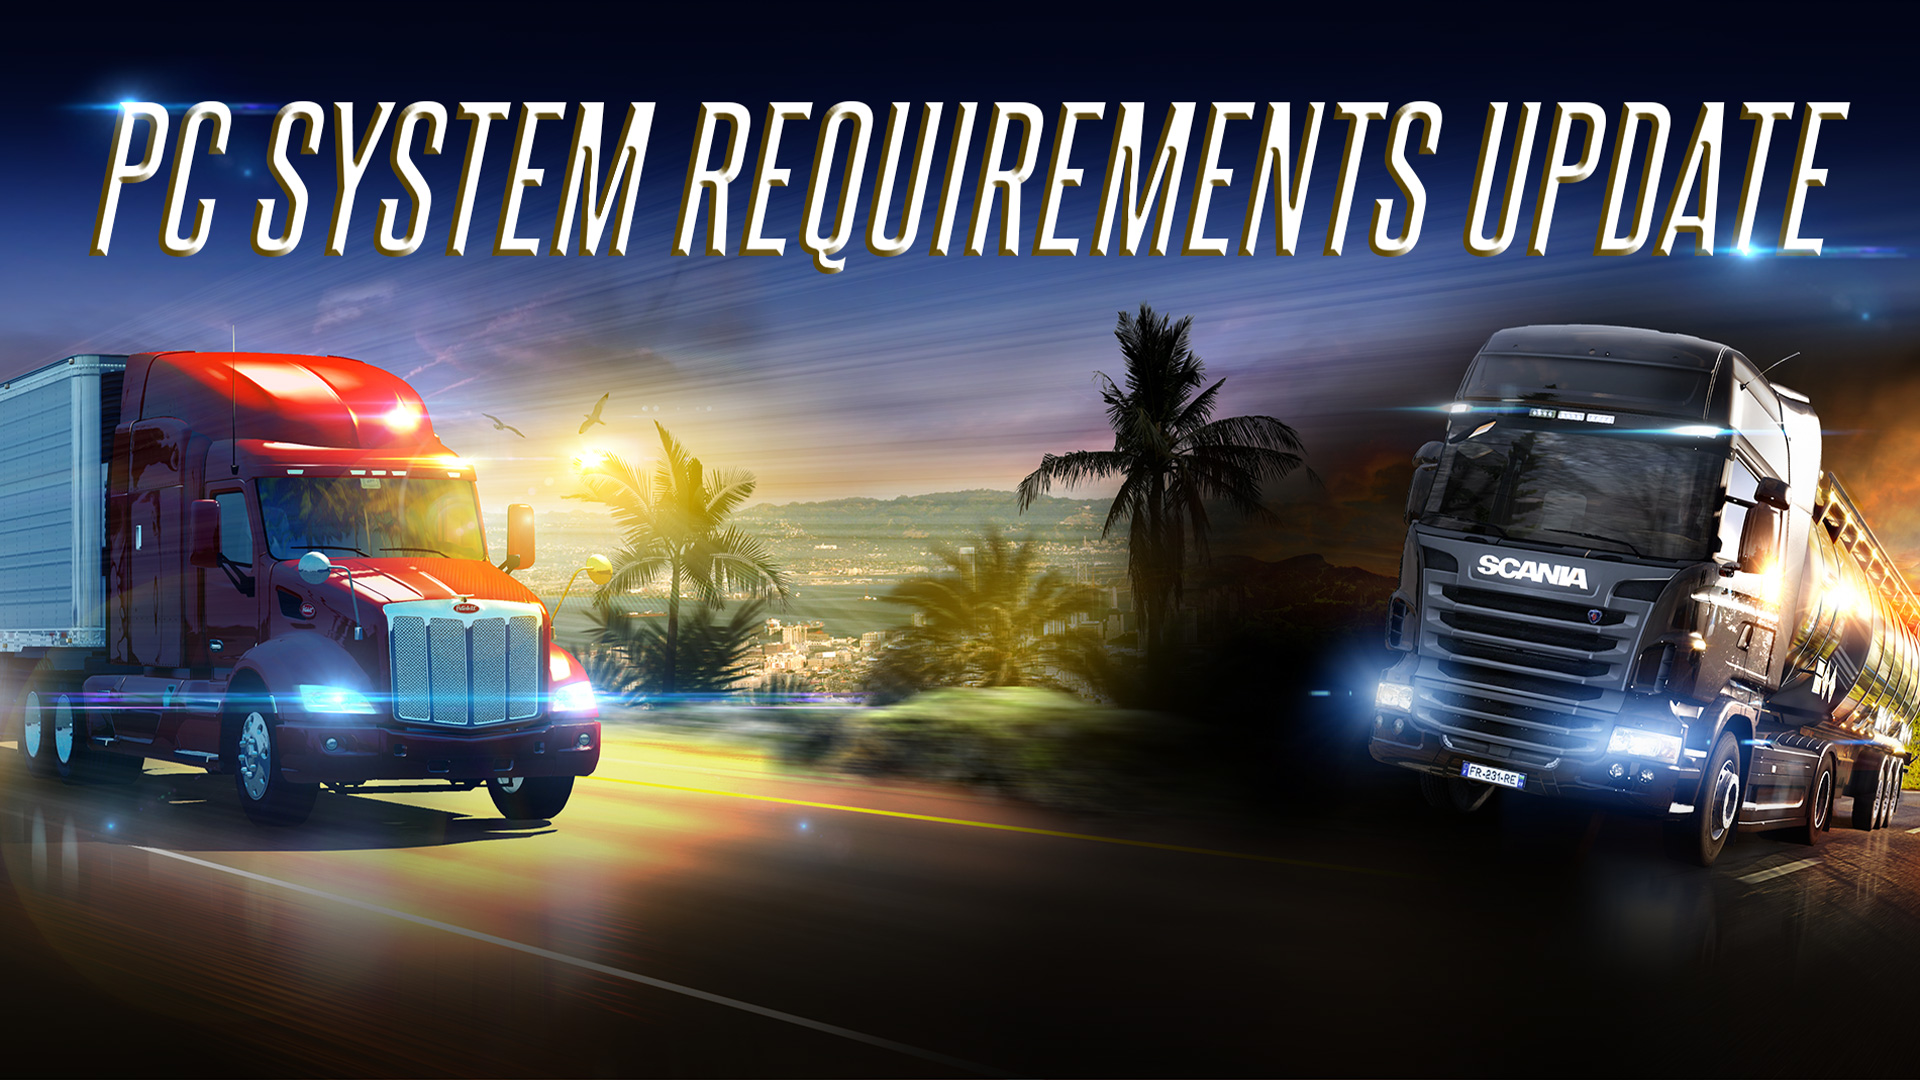 Euro Truck Simulator 2 system requirements